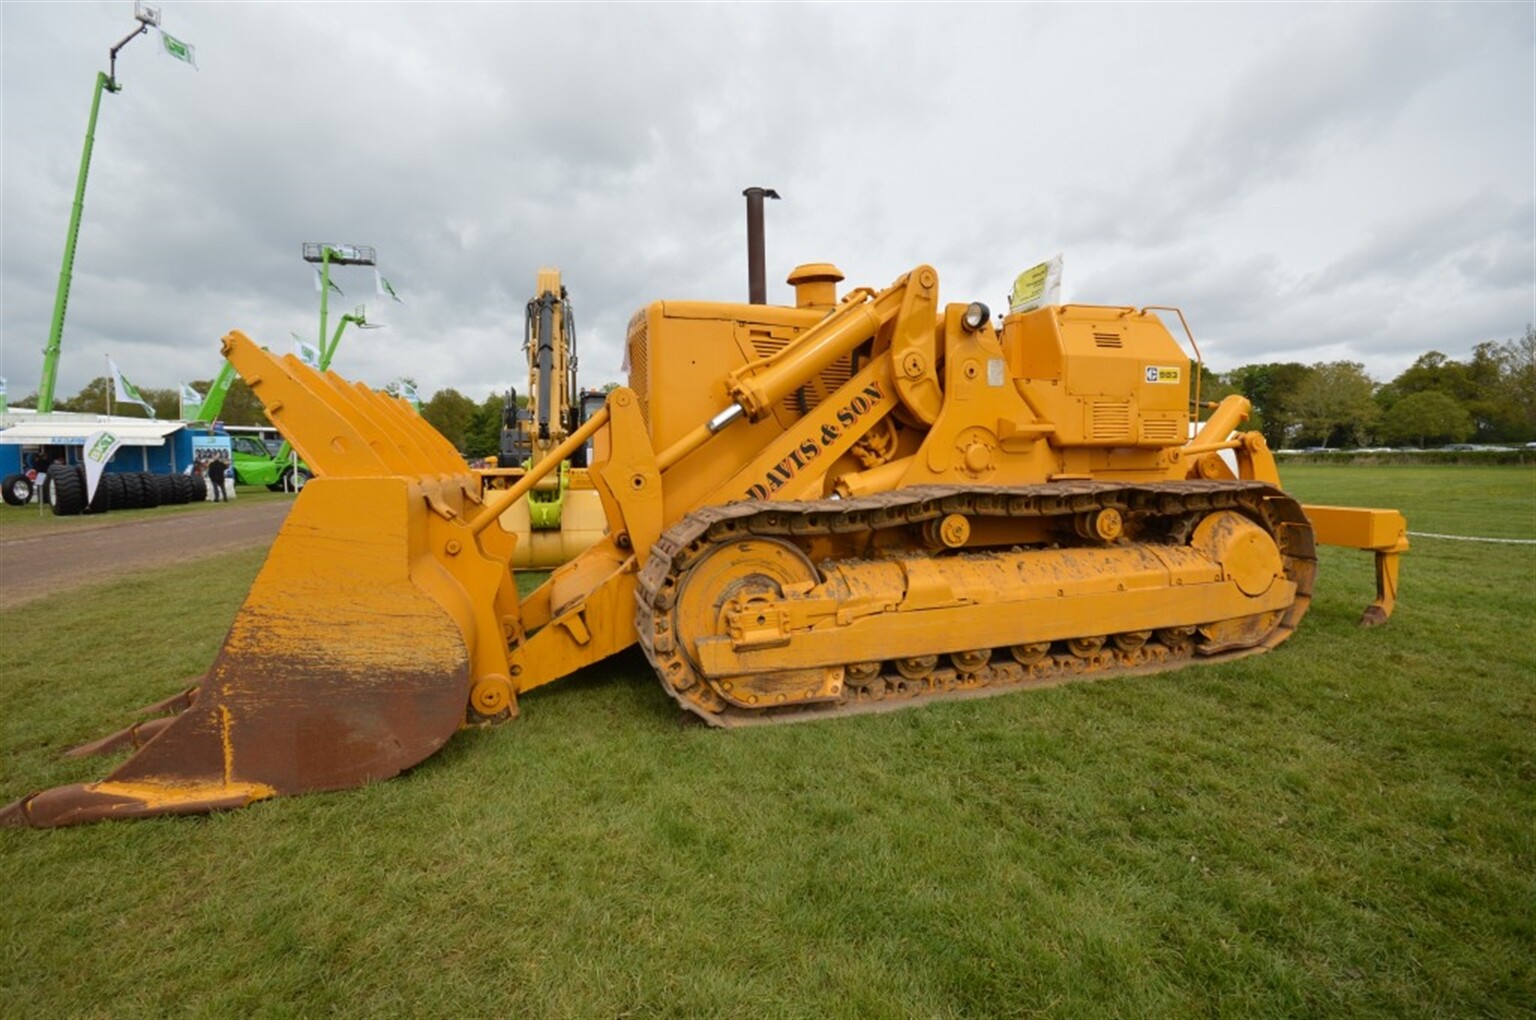 Classic kit rolls out to join the Plantworx party